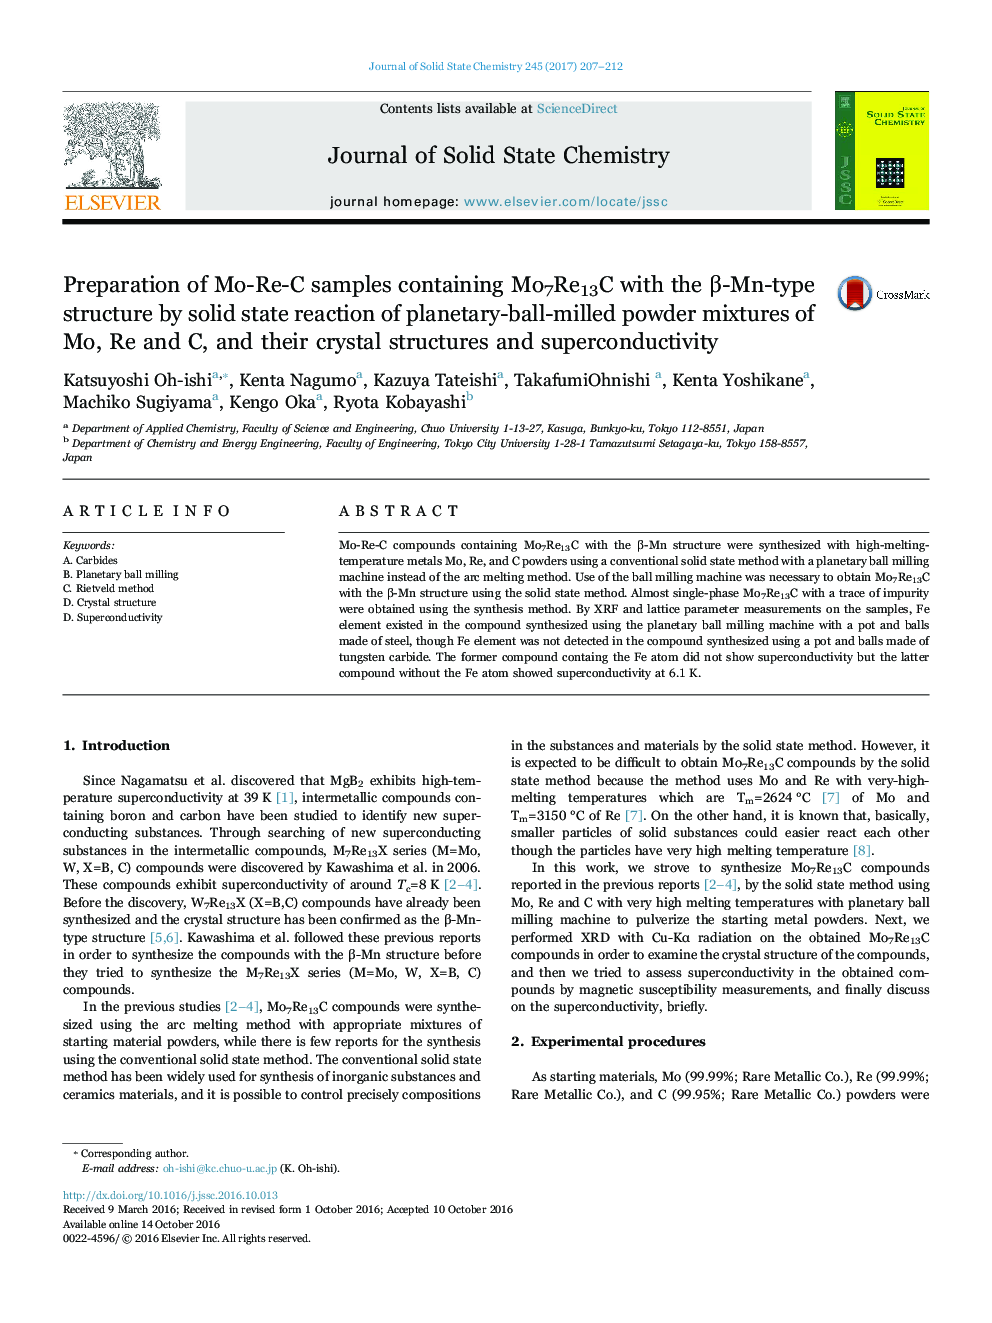 Preparation of Mo-Re-C samples containing Mo7Re13C with the Î²-Mn-type structure by solid state reaction of planetary-ball-milled powder mixtures of Mo, Re and C, and their crystal structures and superconductivity